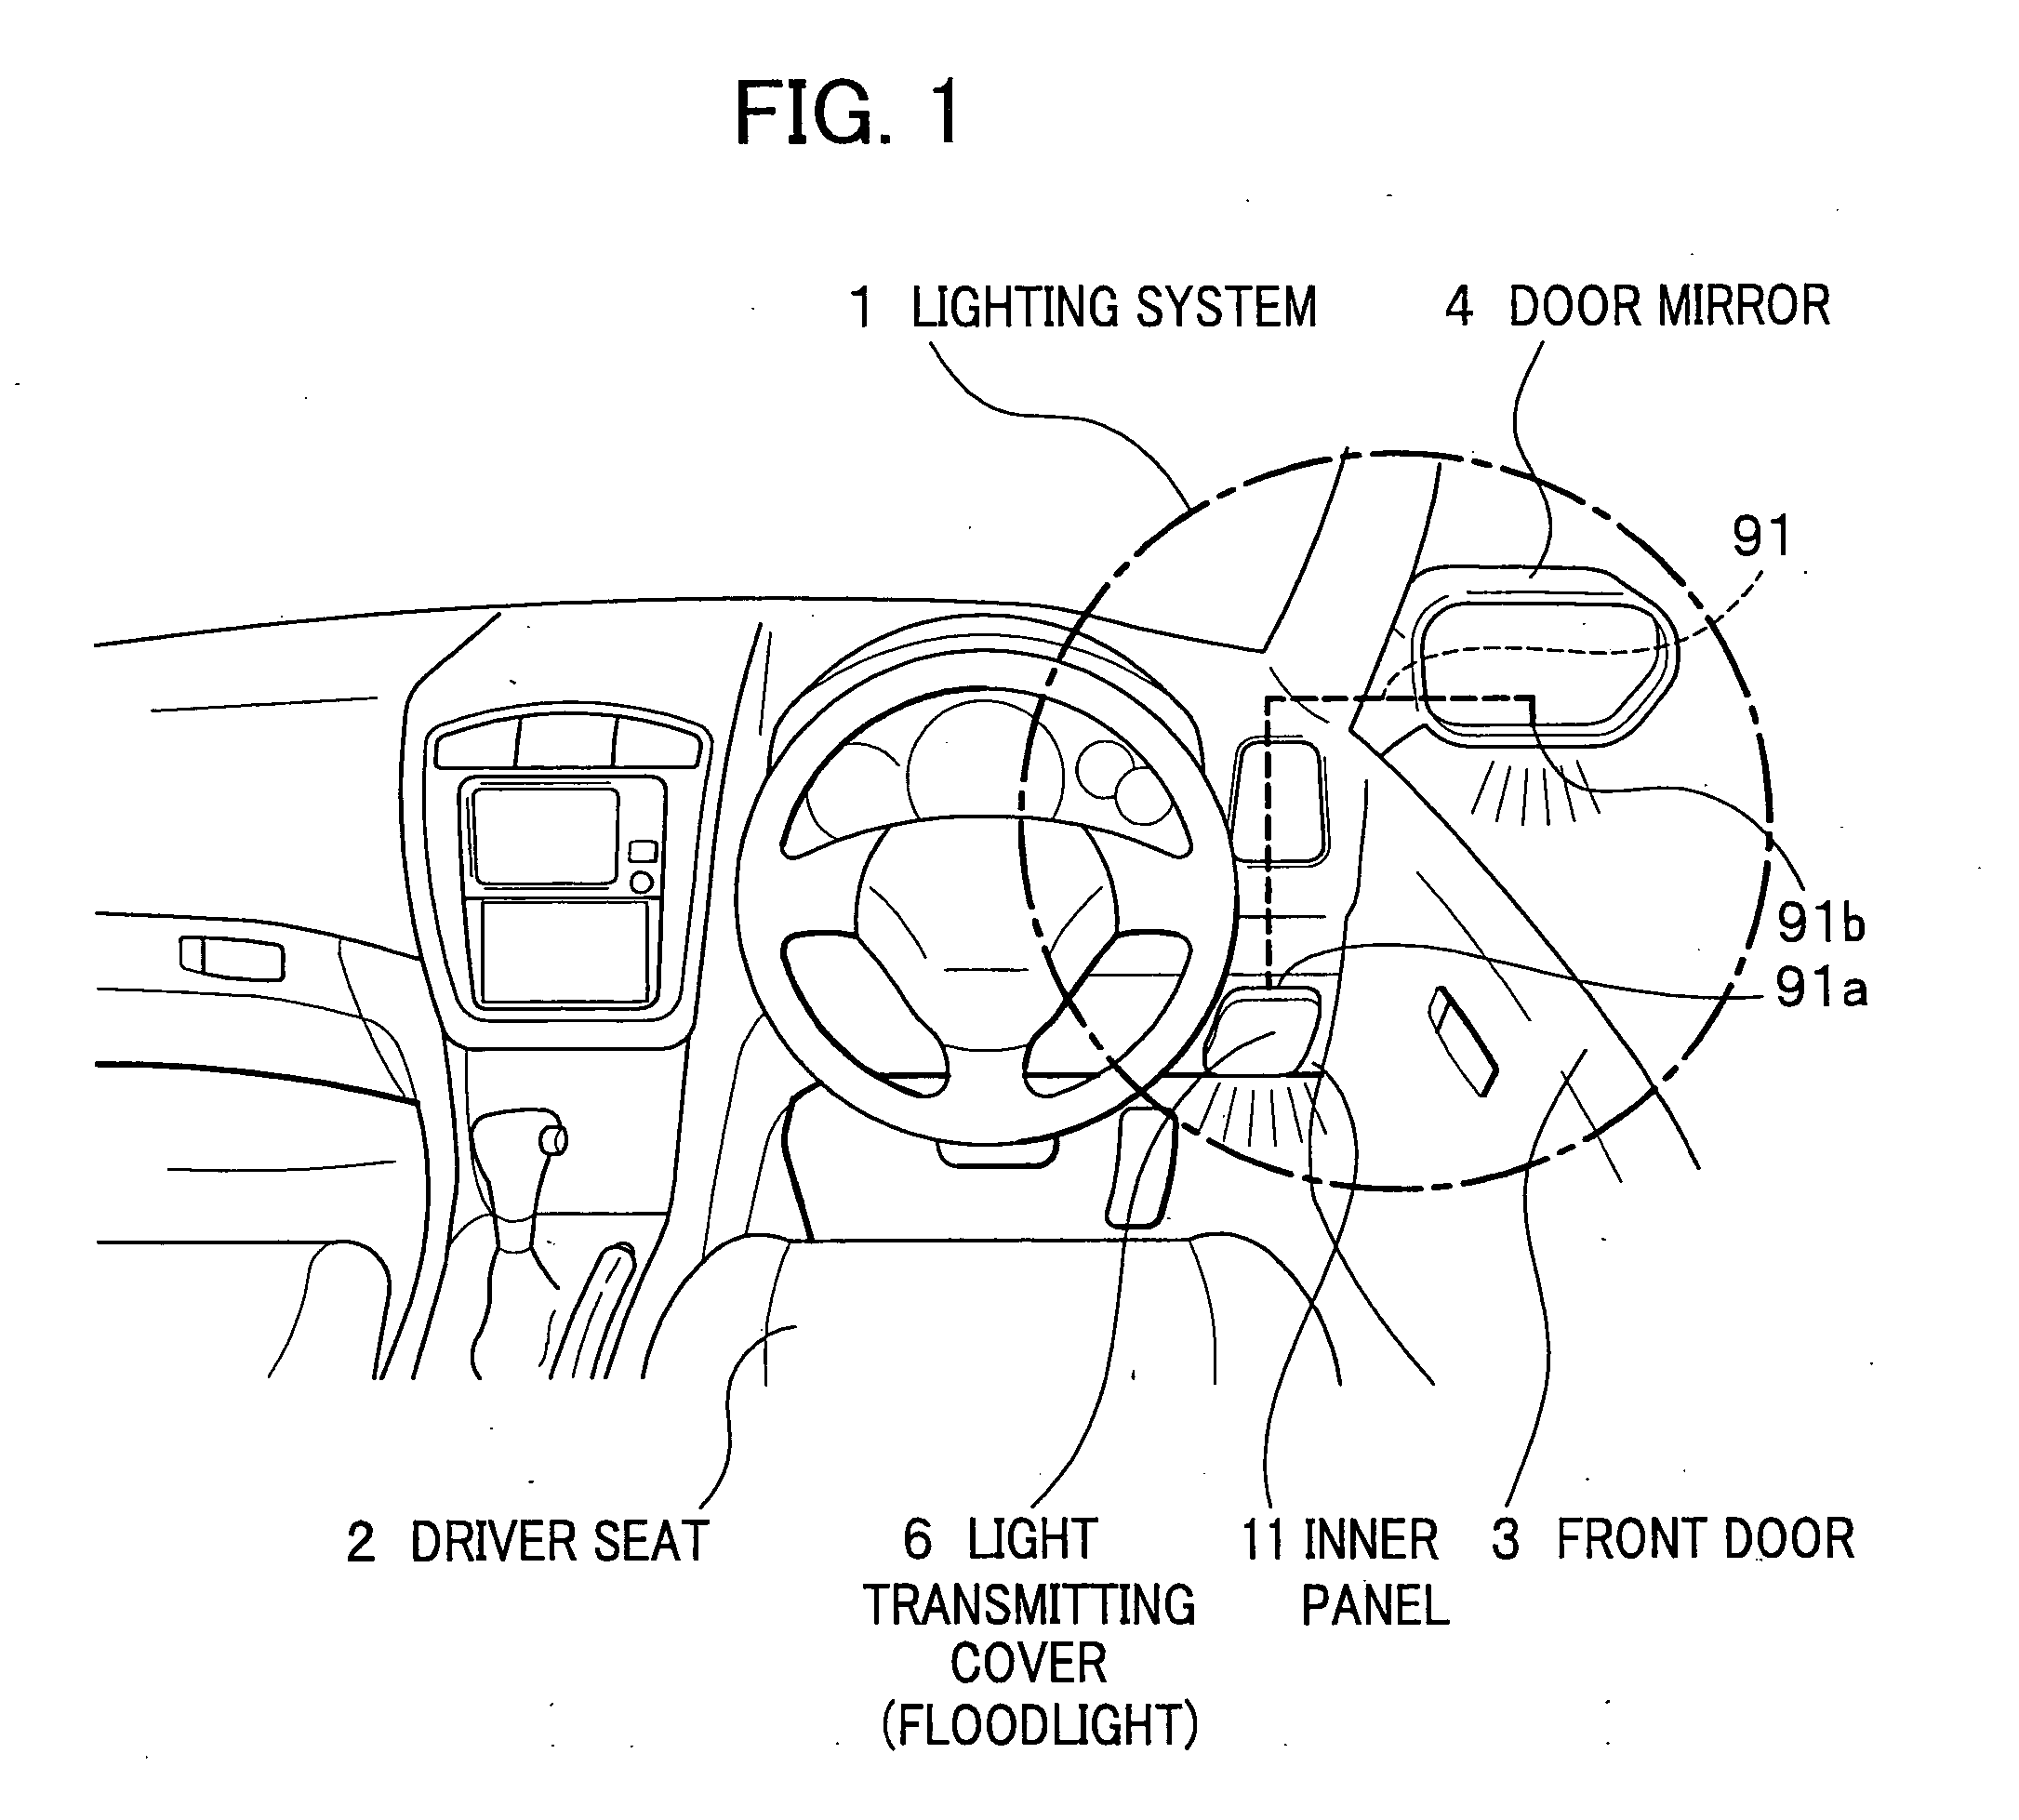 Lighting system for vehicles